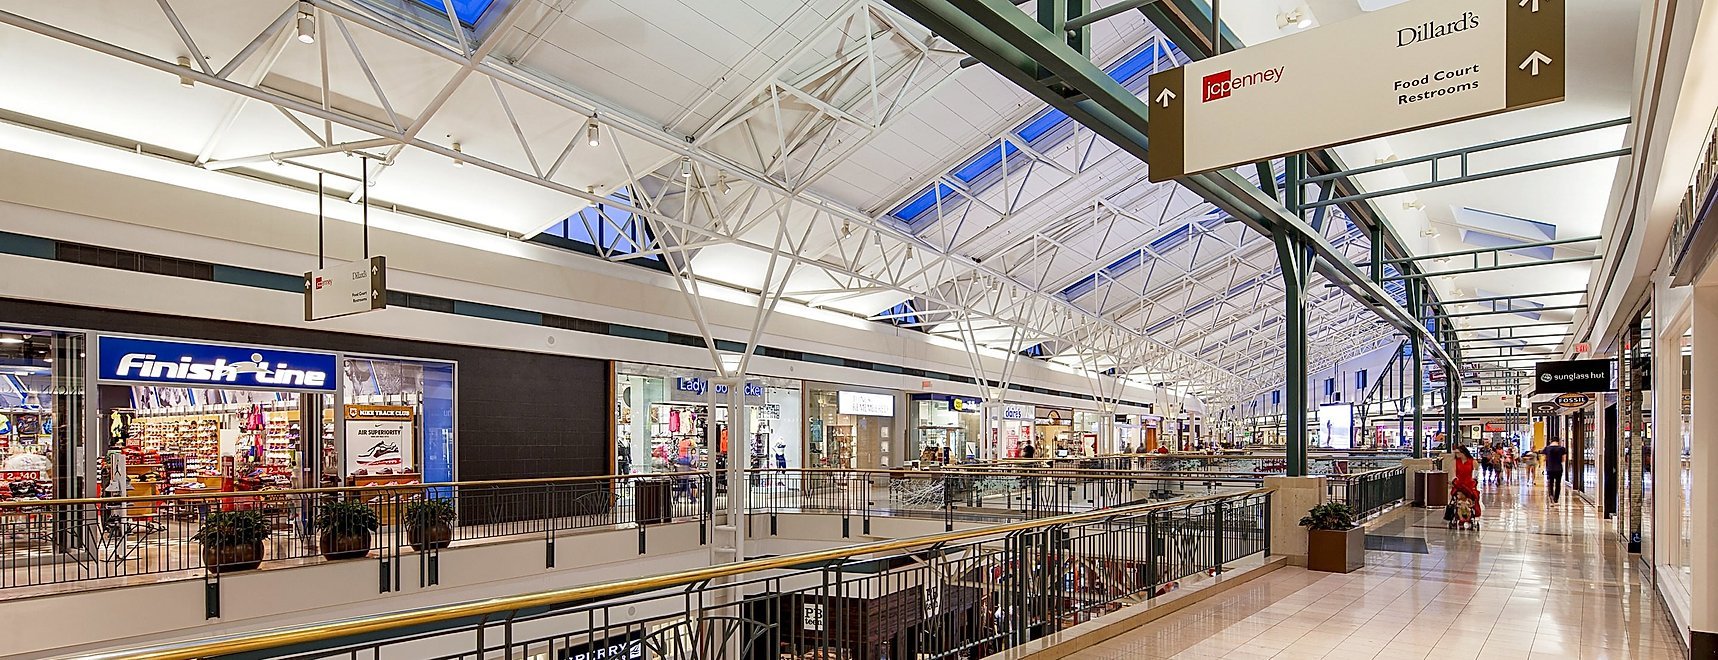 Woodlands Mall Food Court, Houston Retail